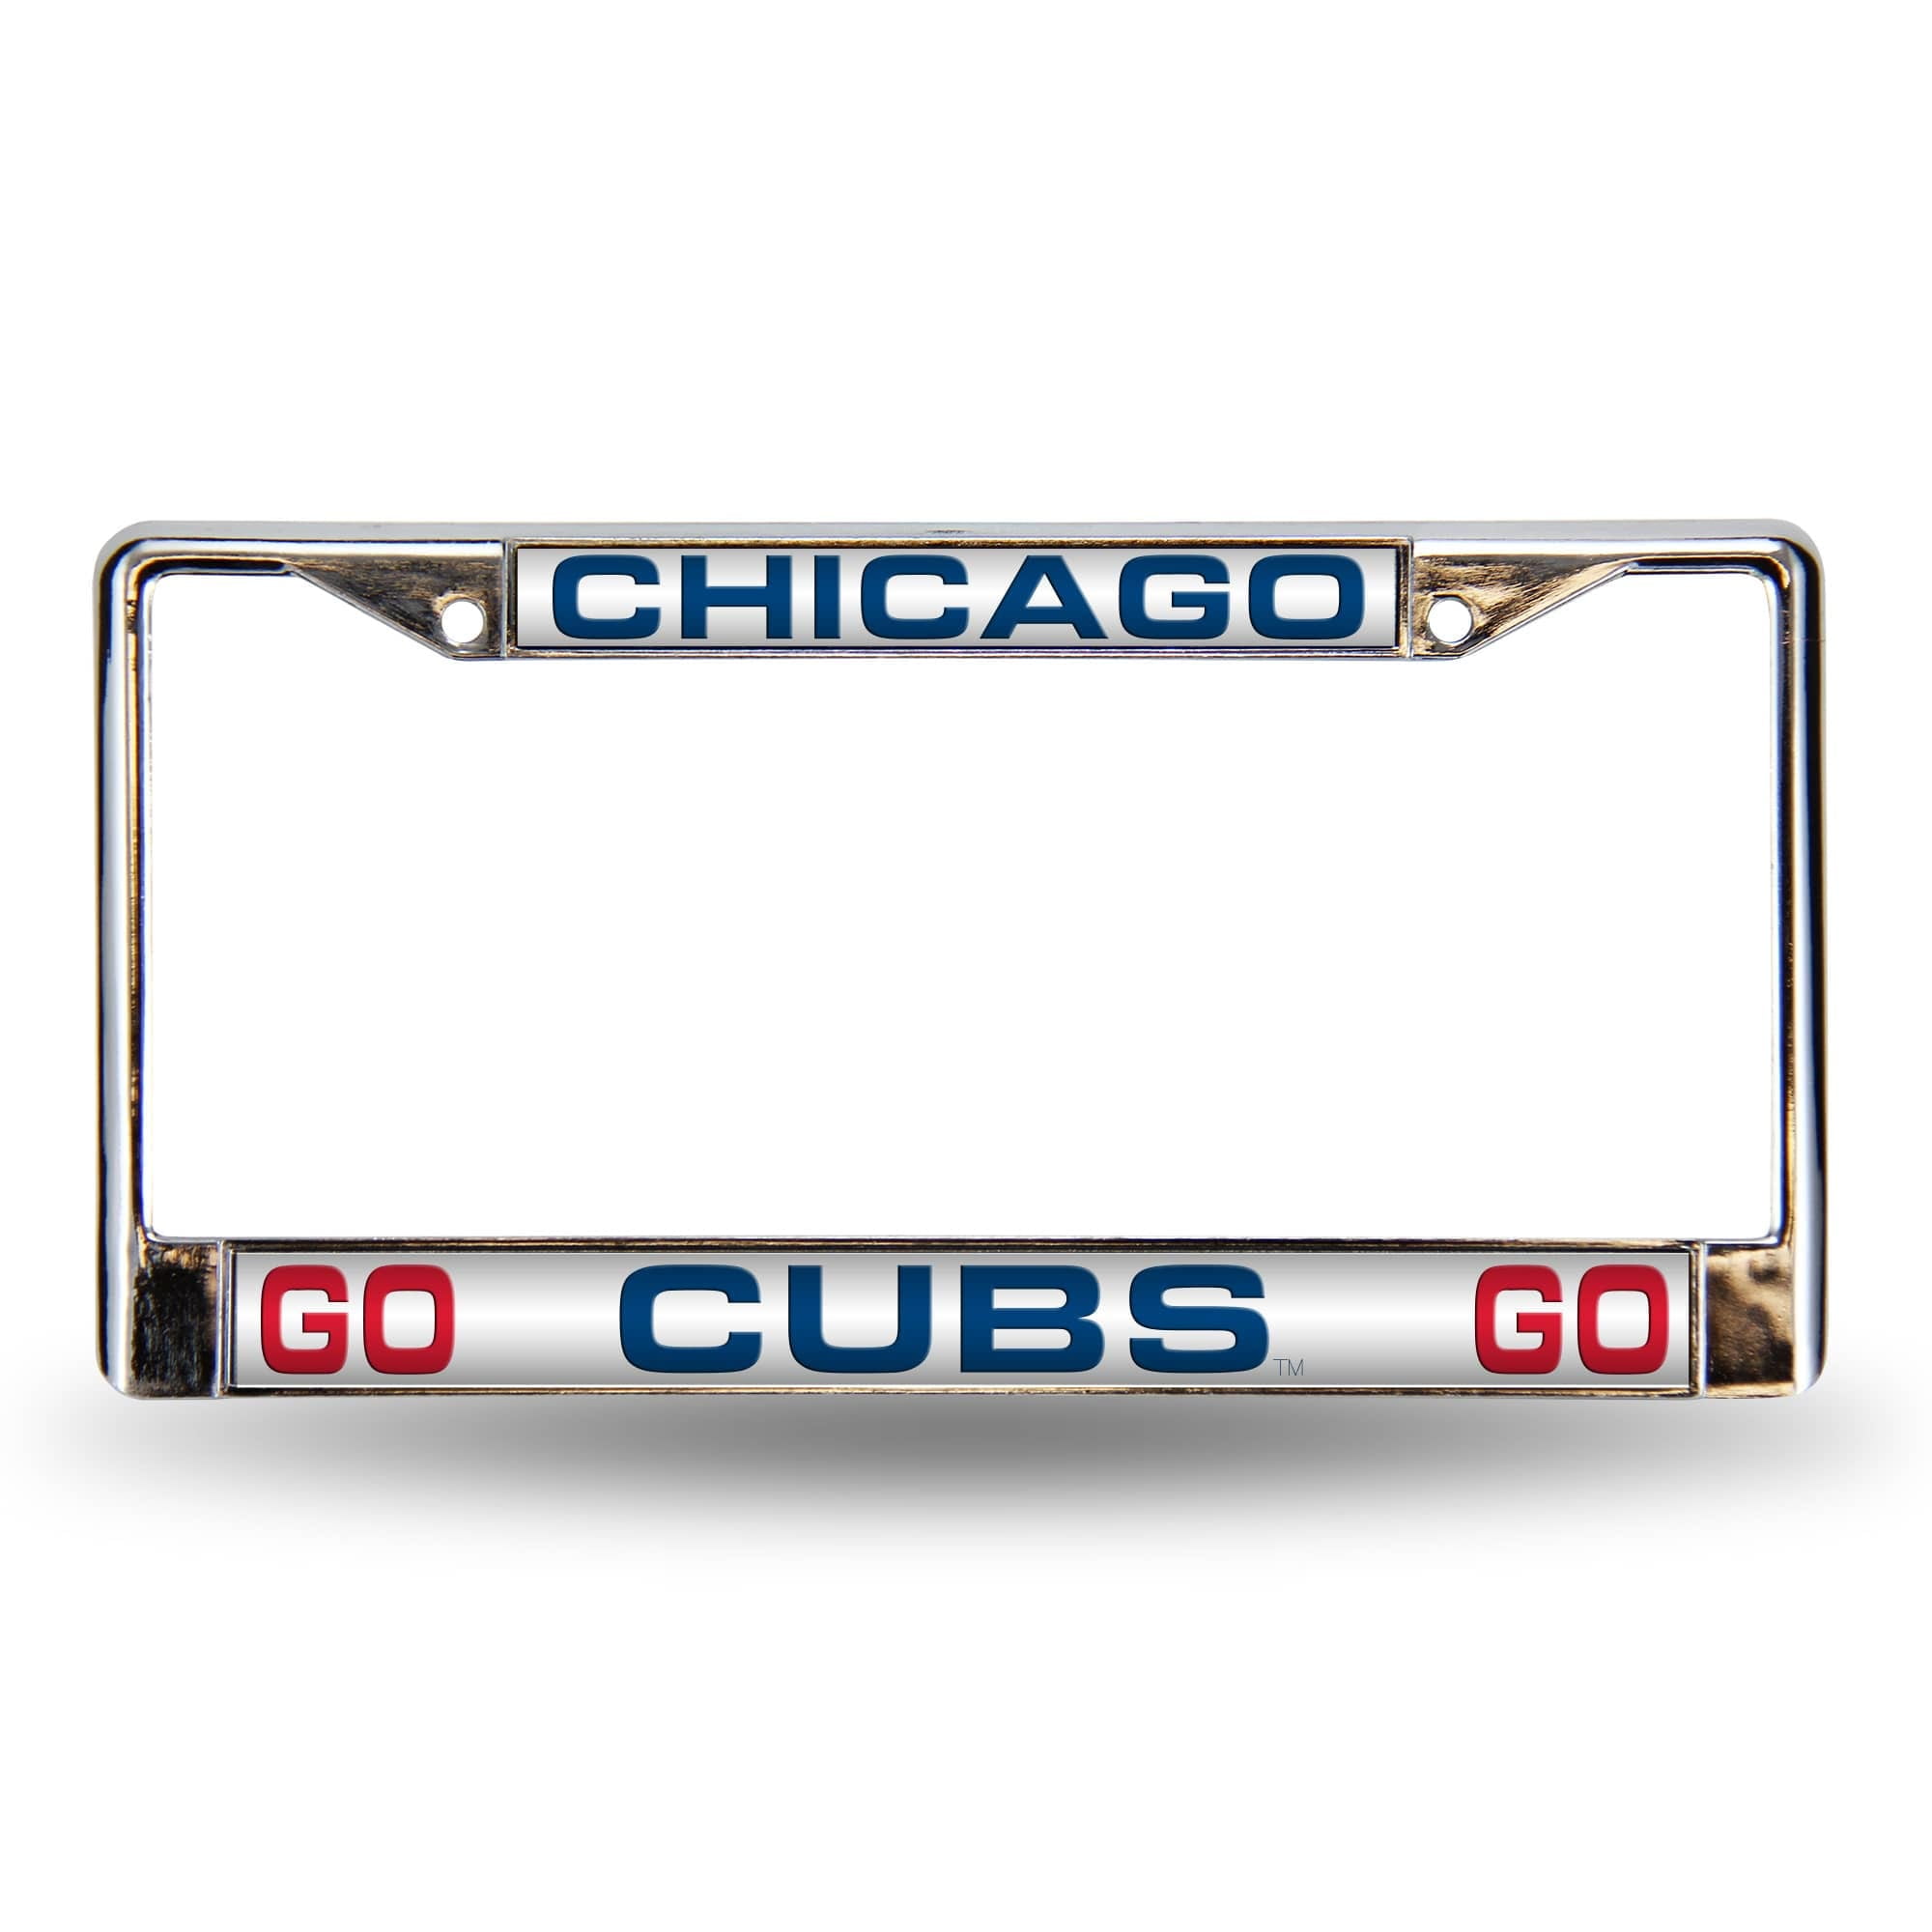 Cubs Home Decor Chicago Cubs World Series Champions Light Switch Cover Plate